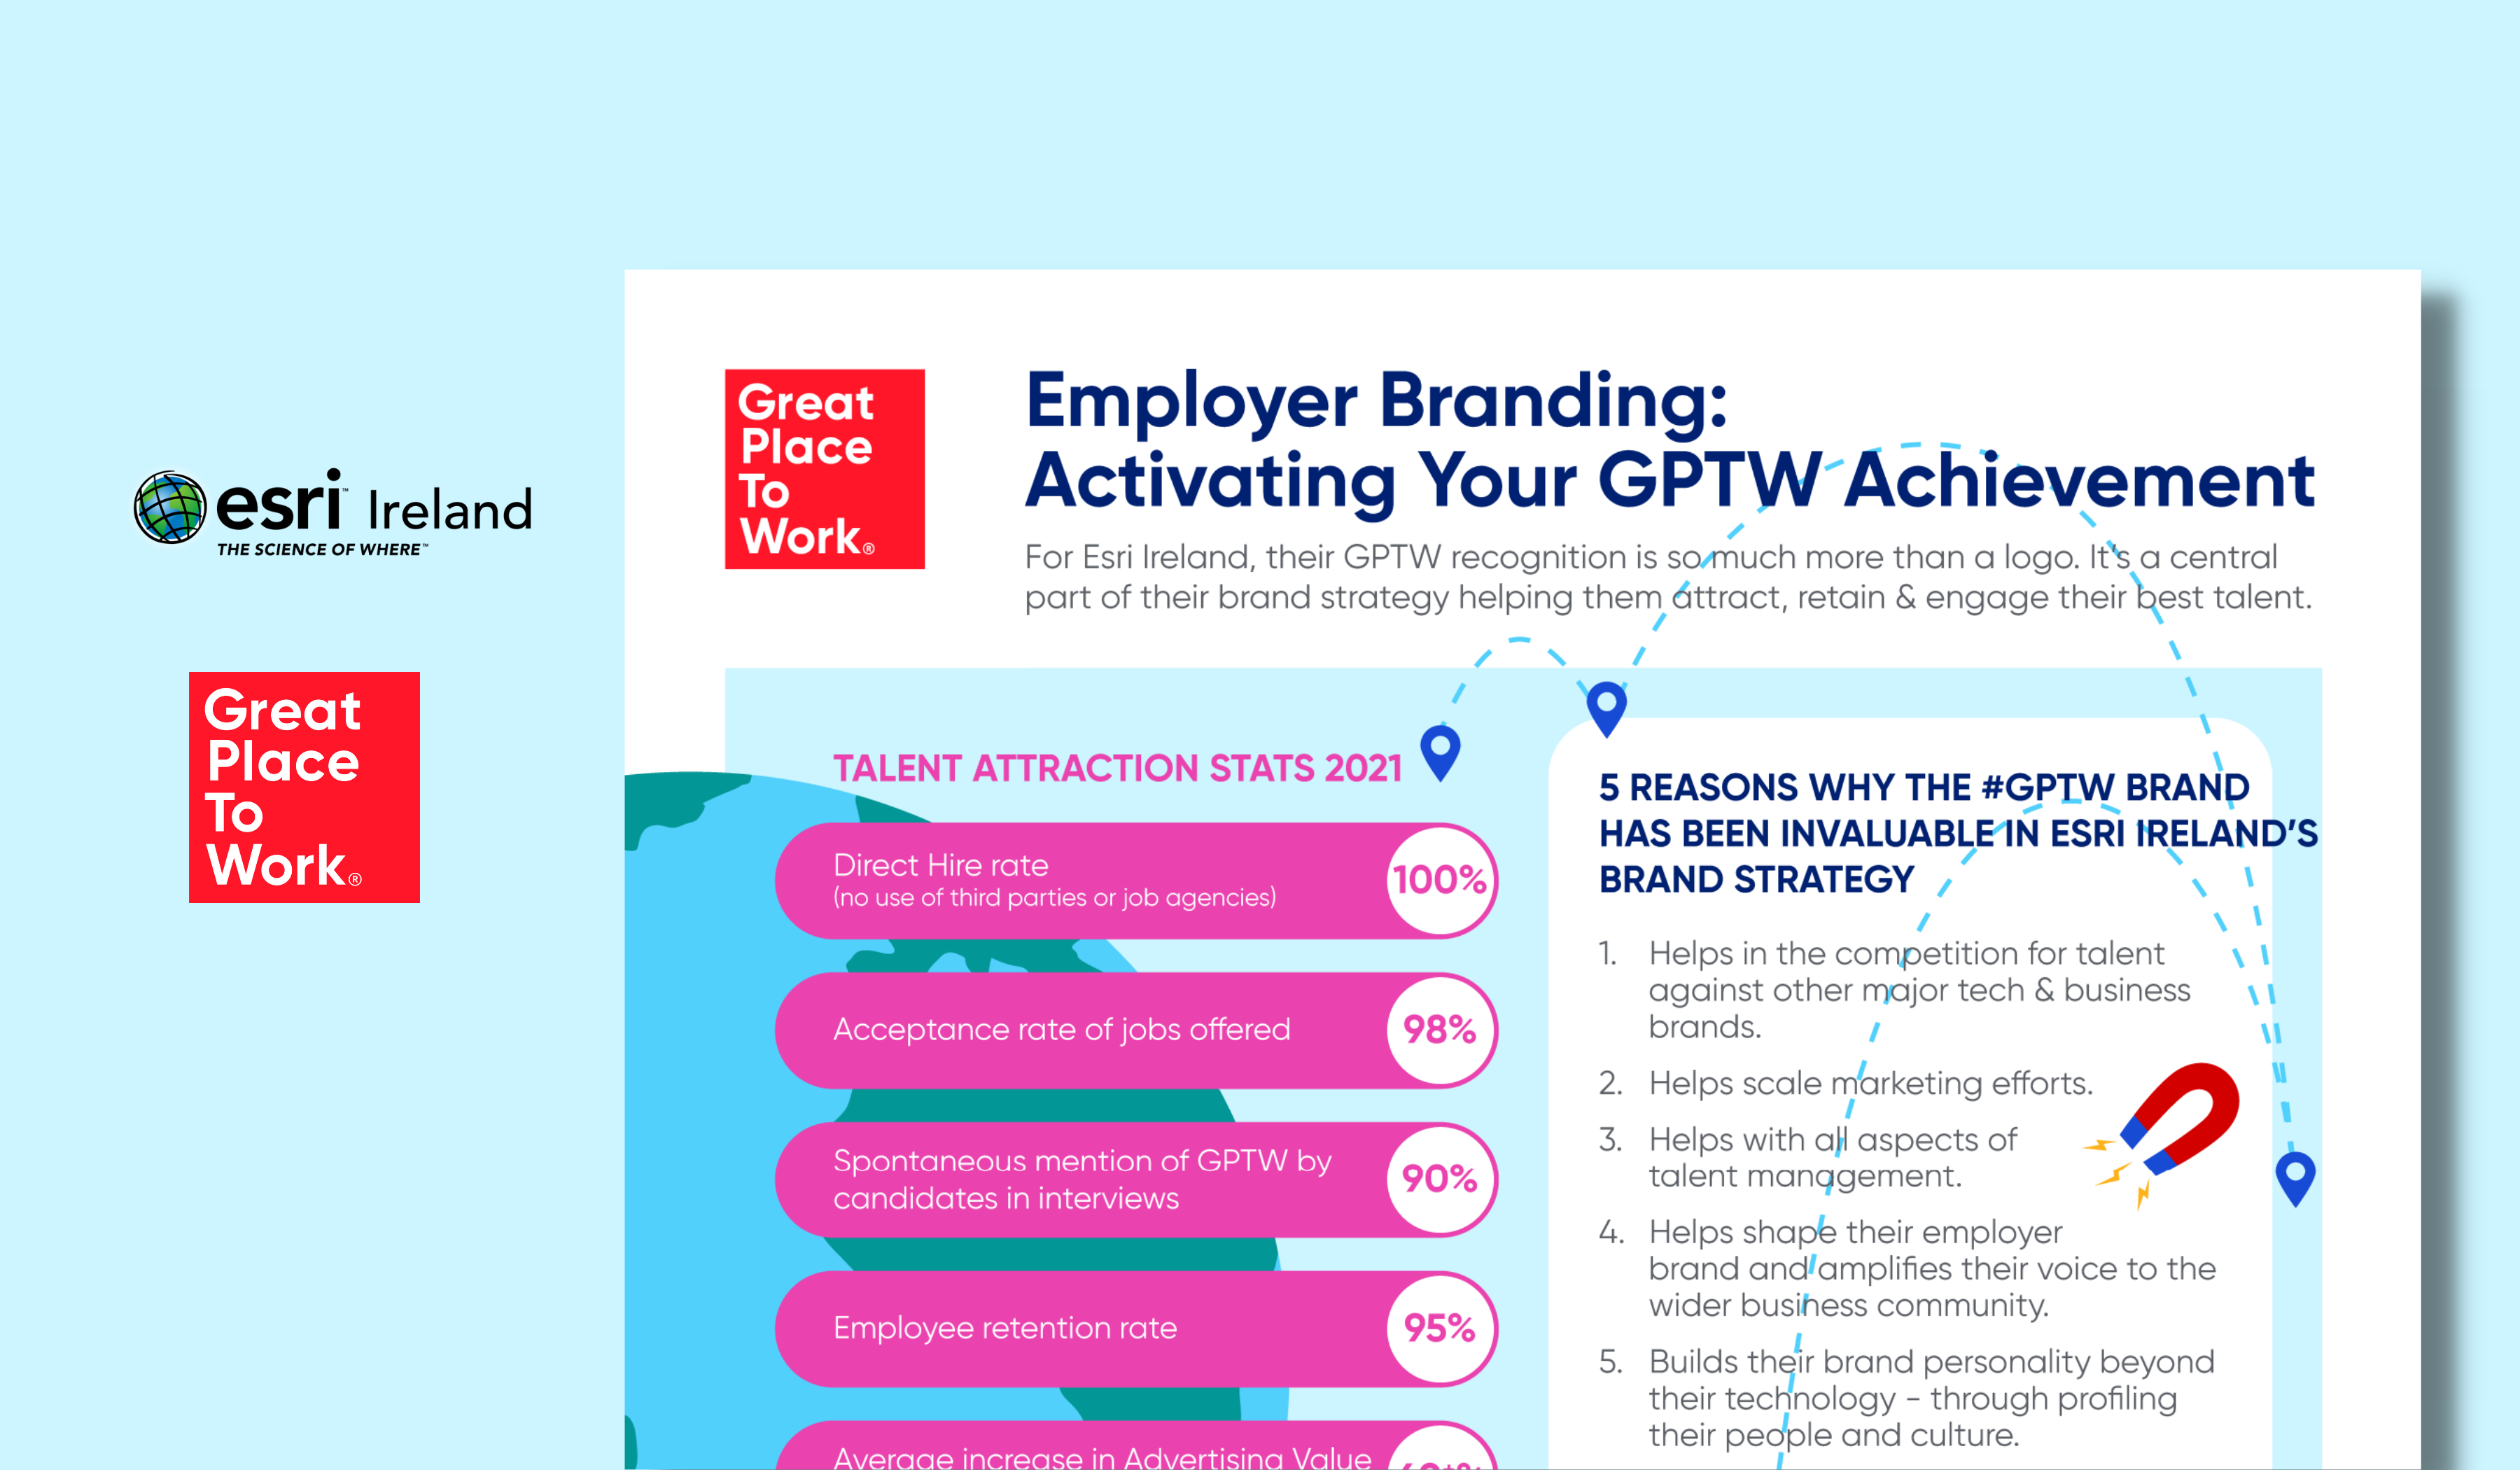 How Esri Ireland uses their Great Place to Work recognition to leverage their Employer Brand